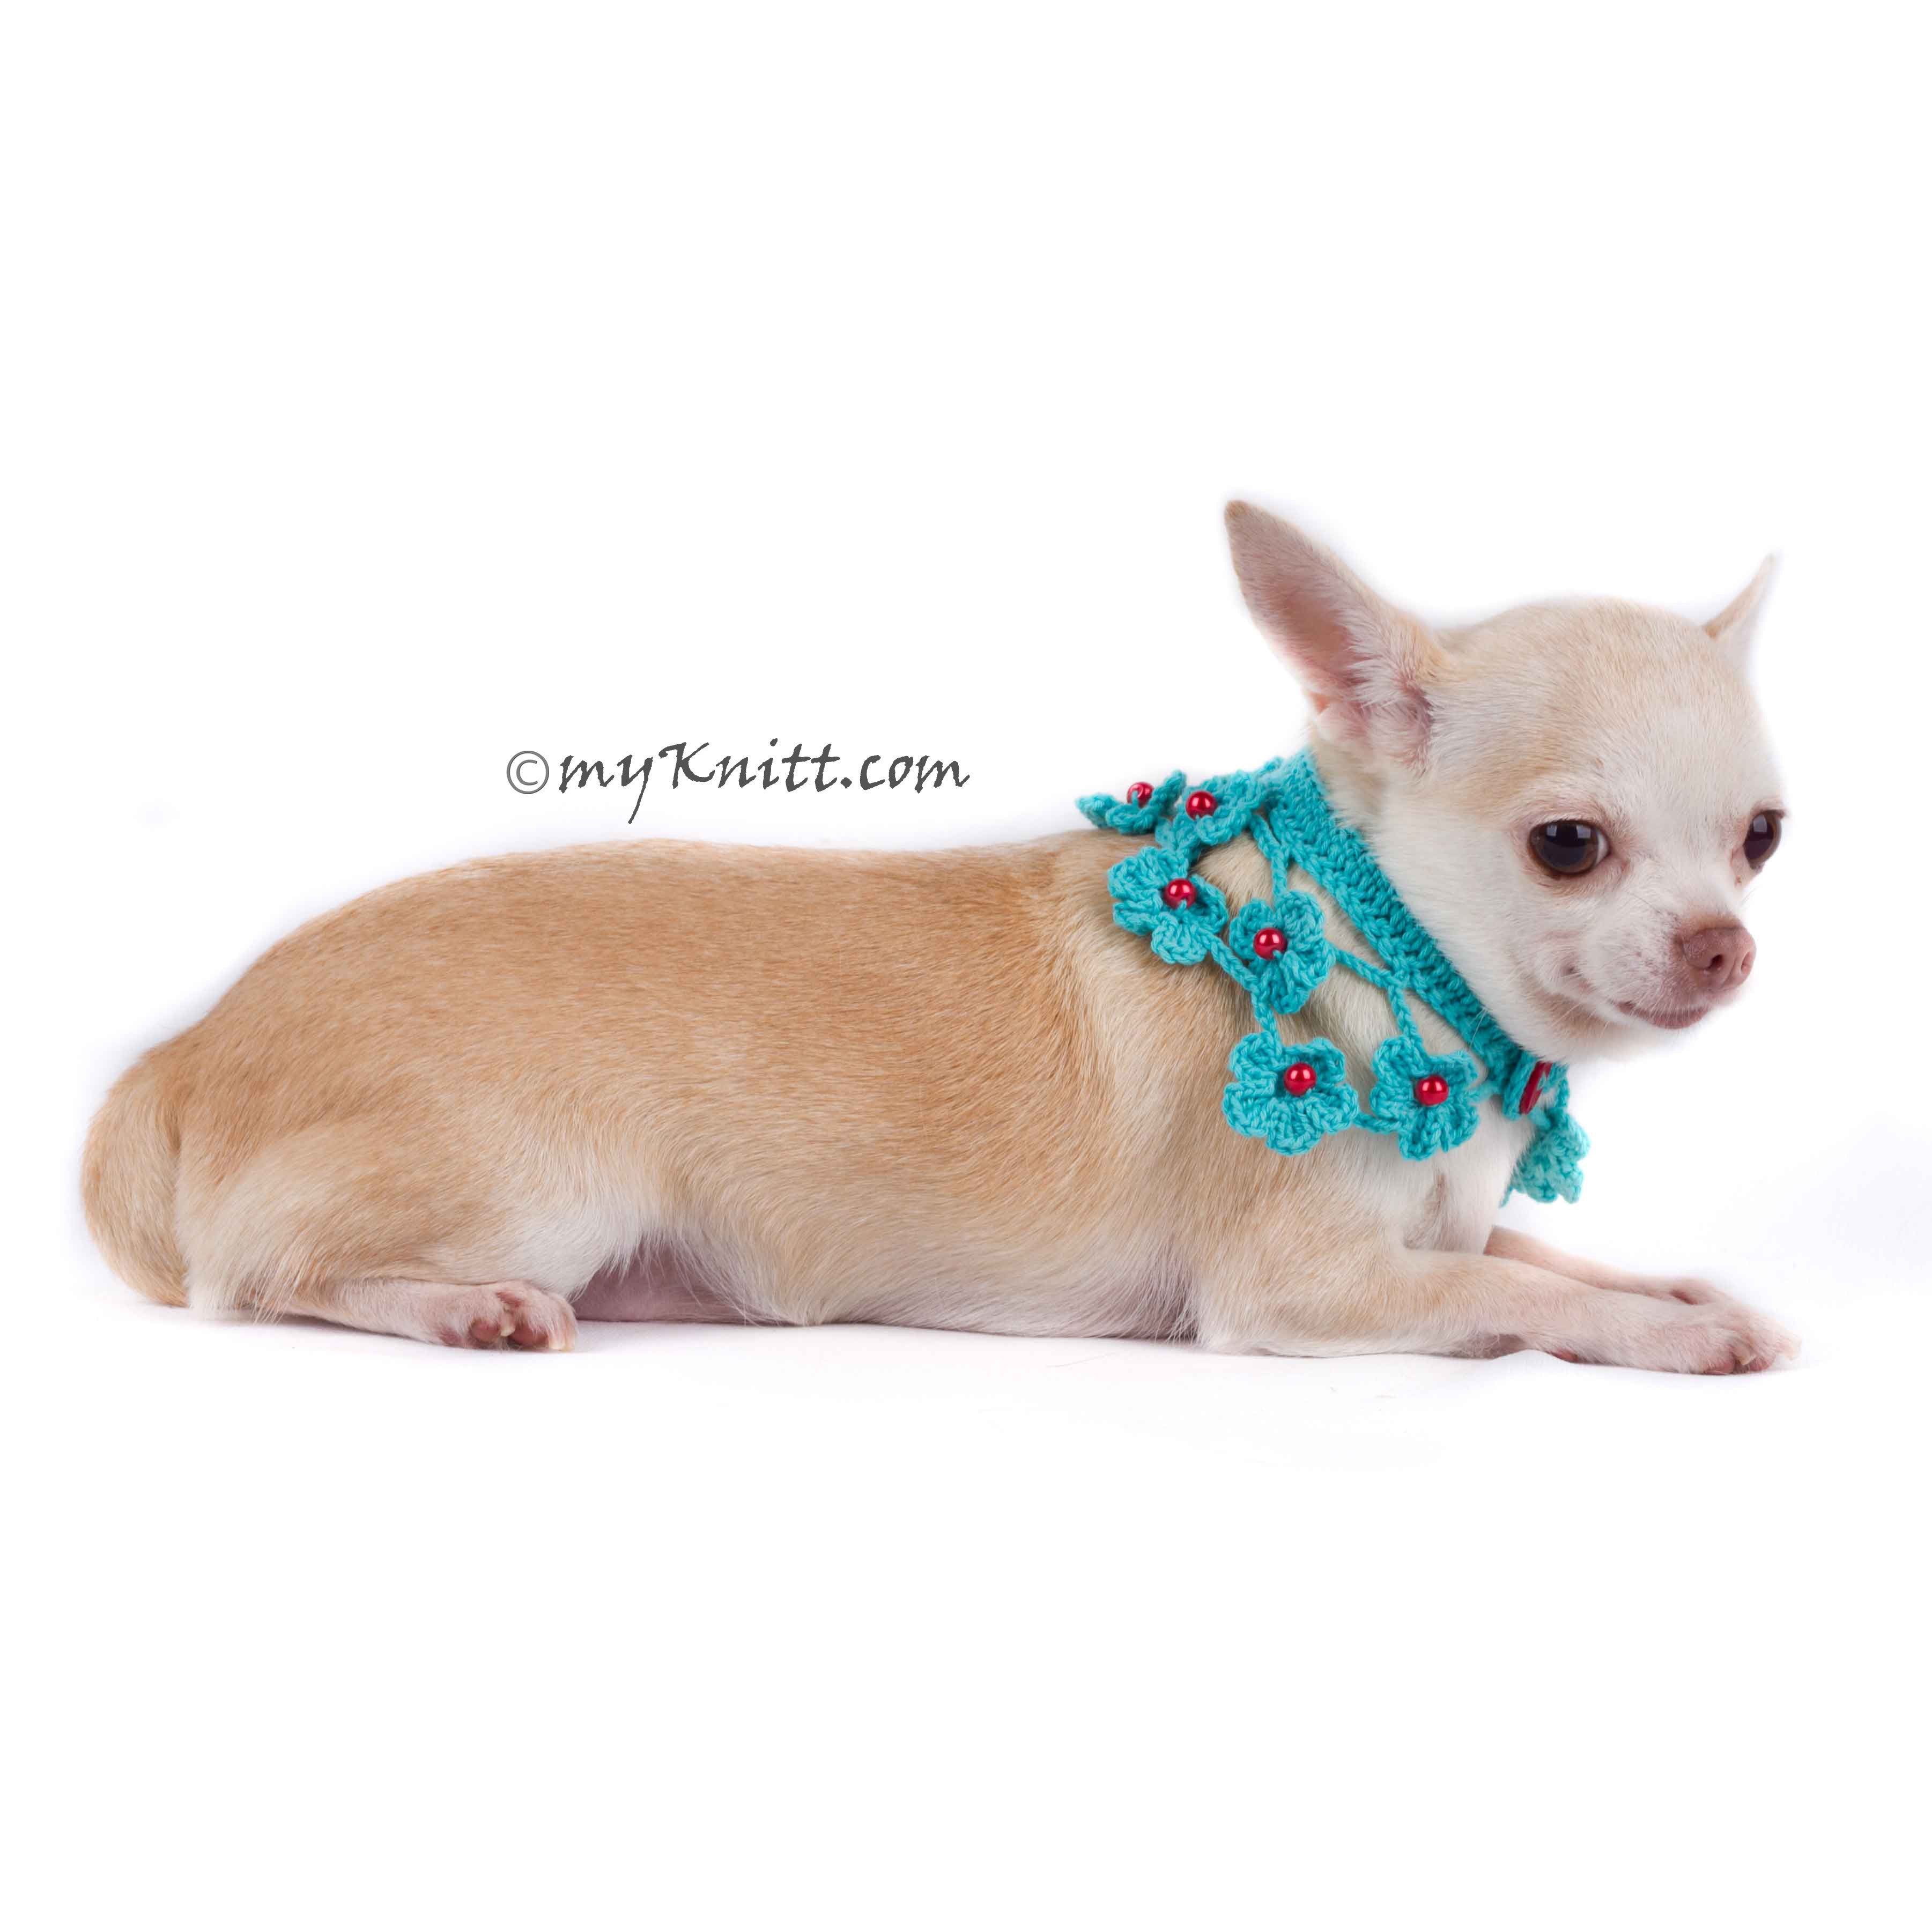 Turquoise Dog Shawl Unique Crocheted Pet Scarf with Pearls DN20 by Myknitt